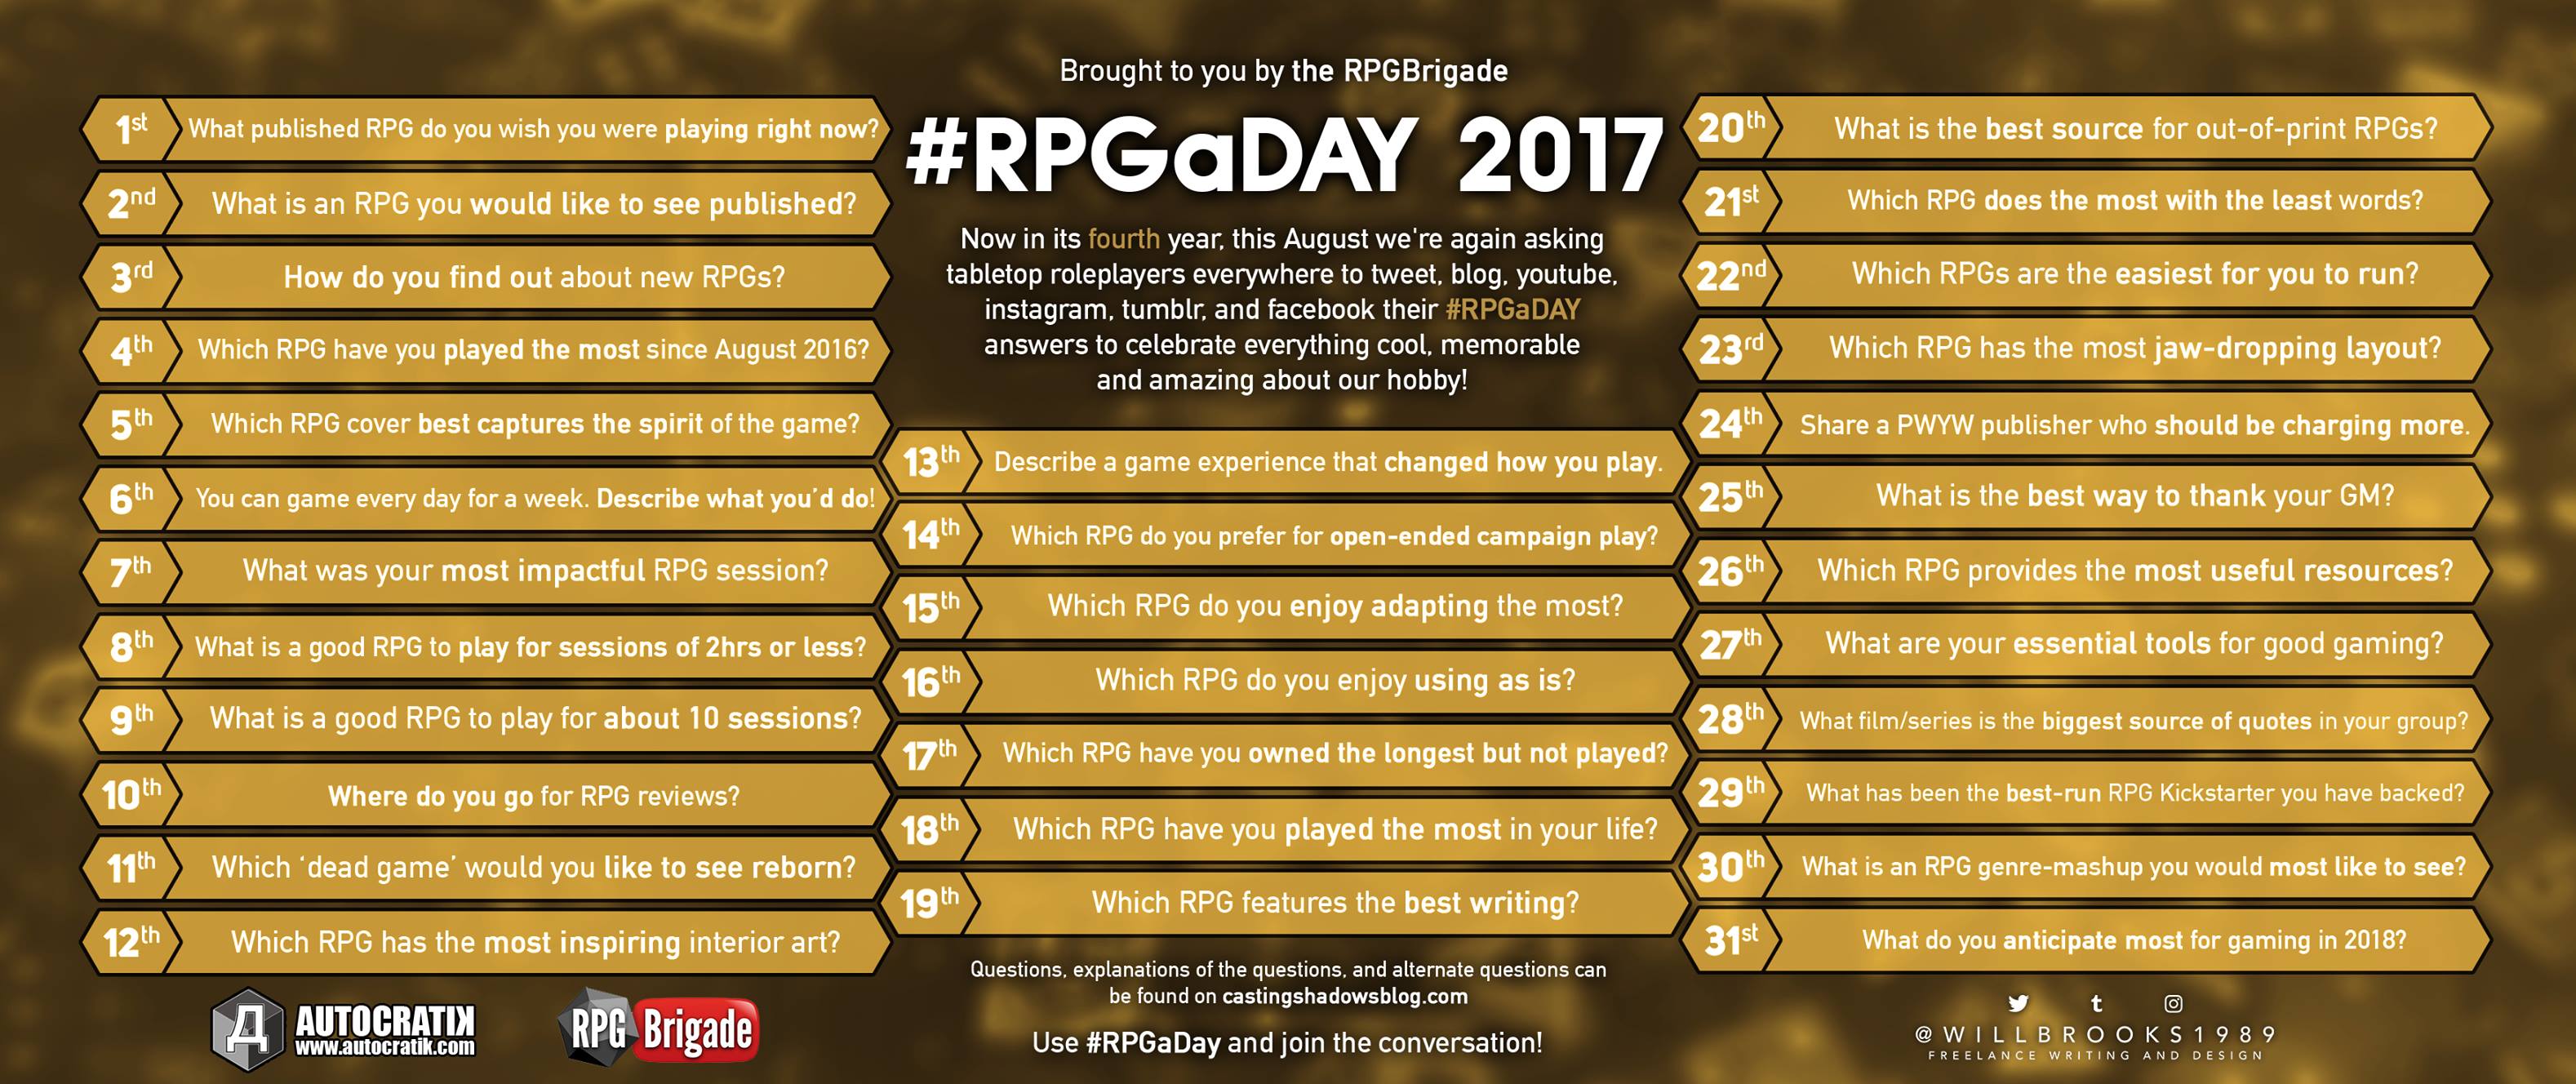 The complete list of topics for RPG-a-Day 2017. The text version of this is available on Nuketown's RPG-A-Day 2017 page.